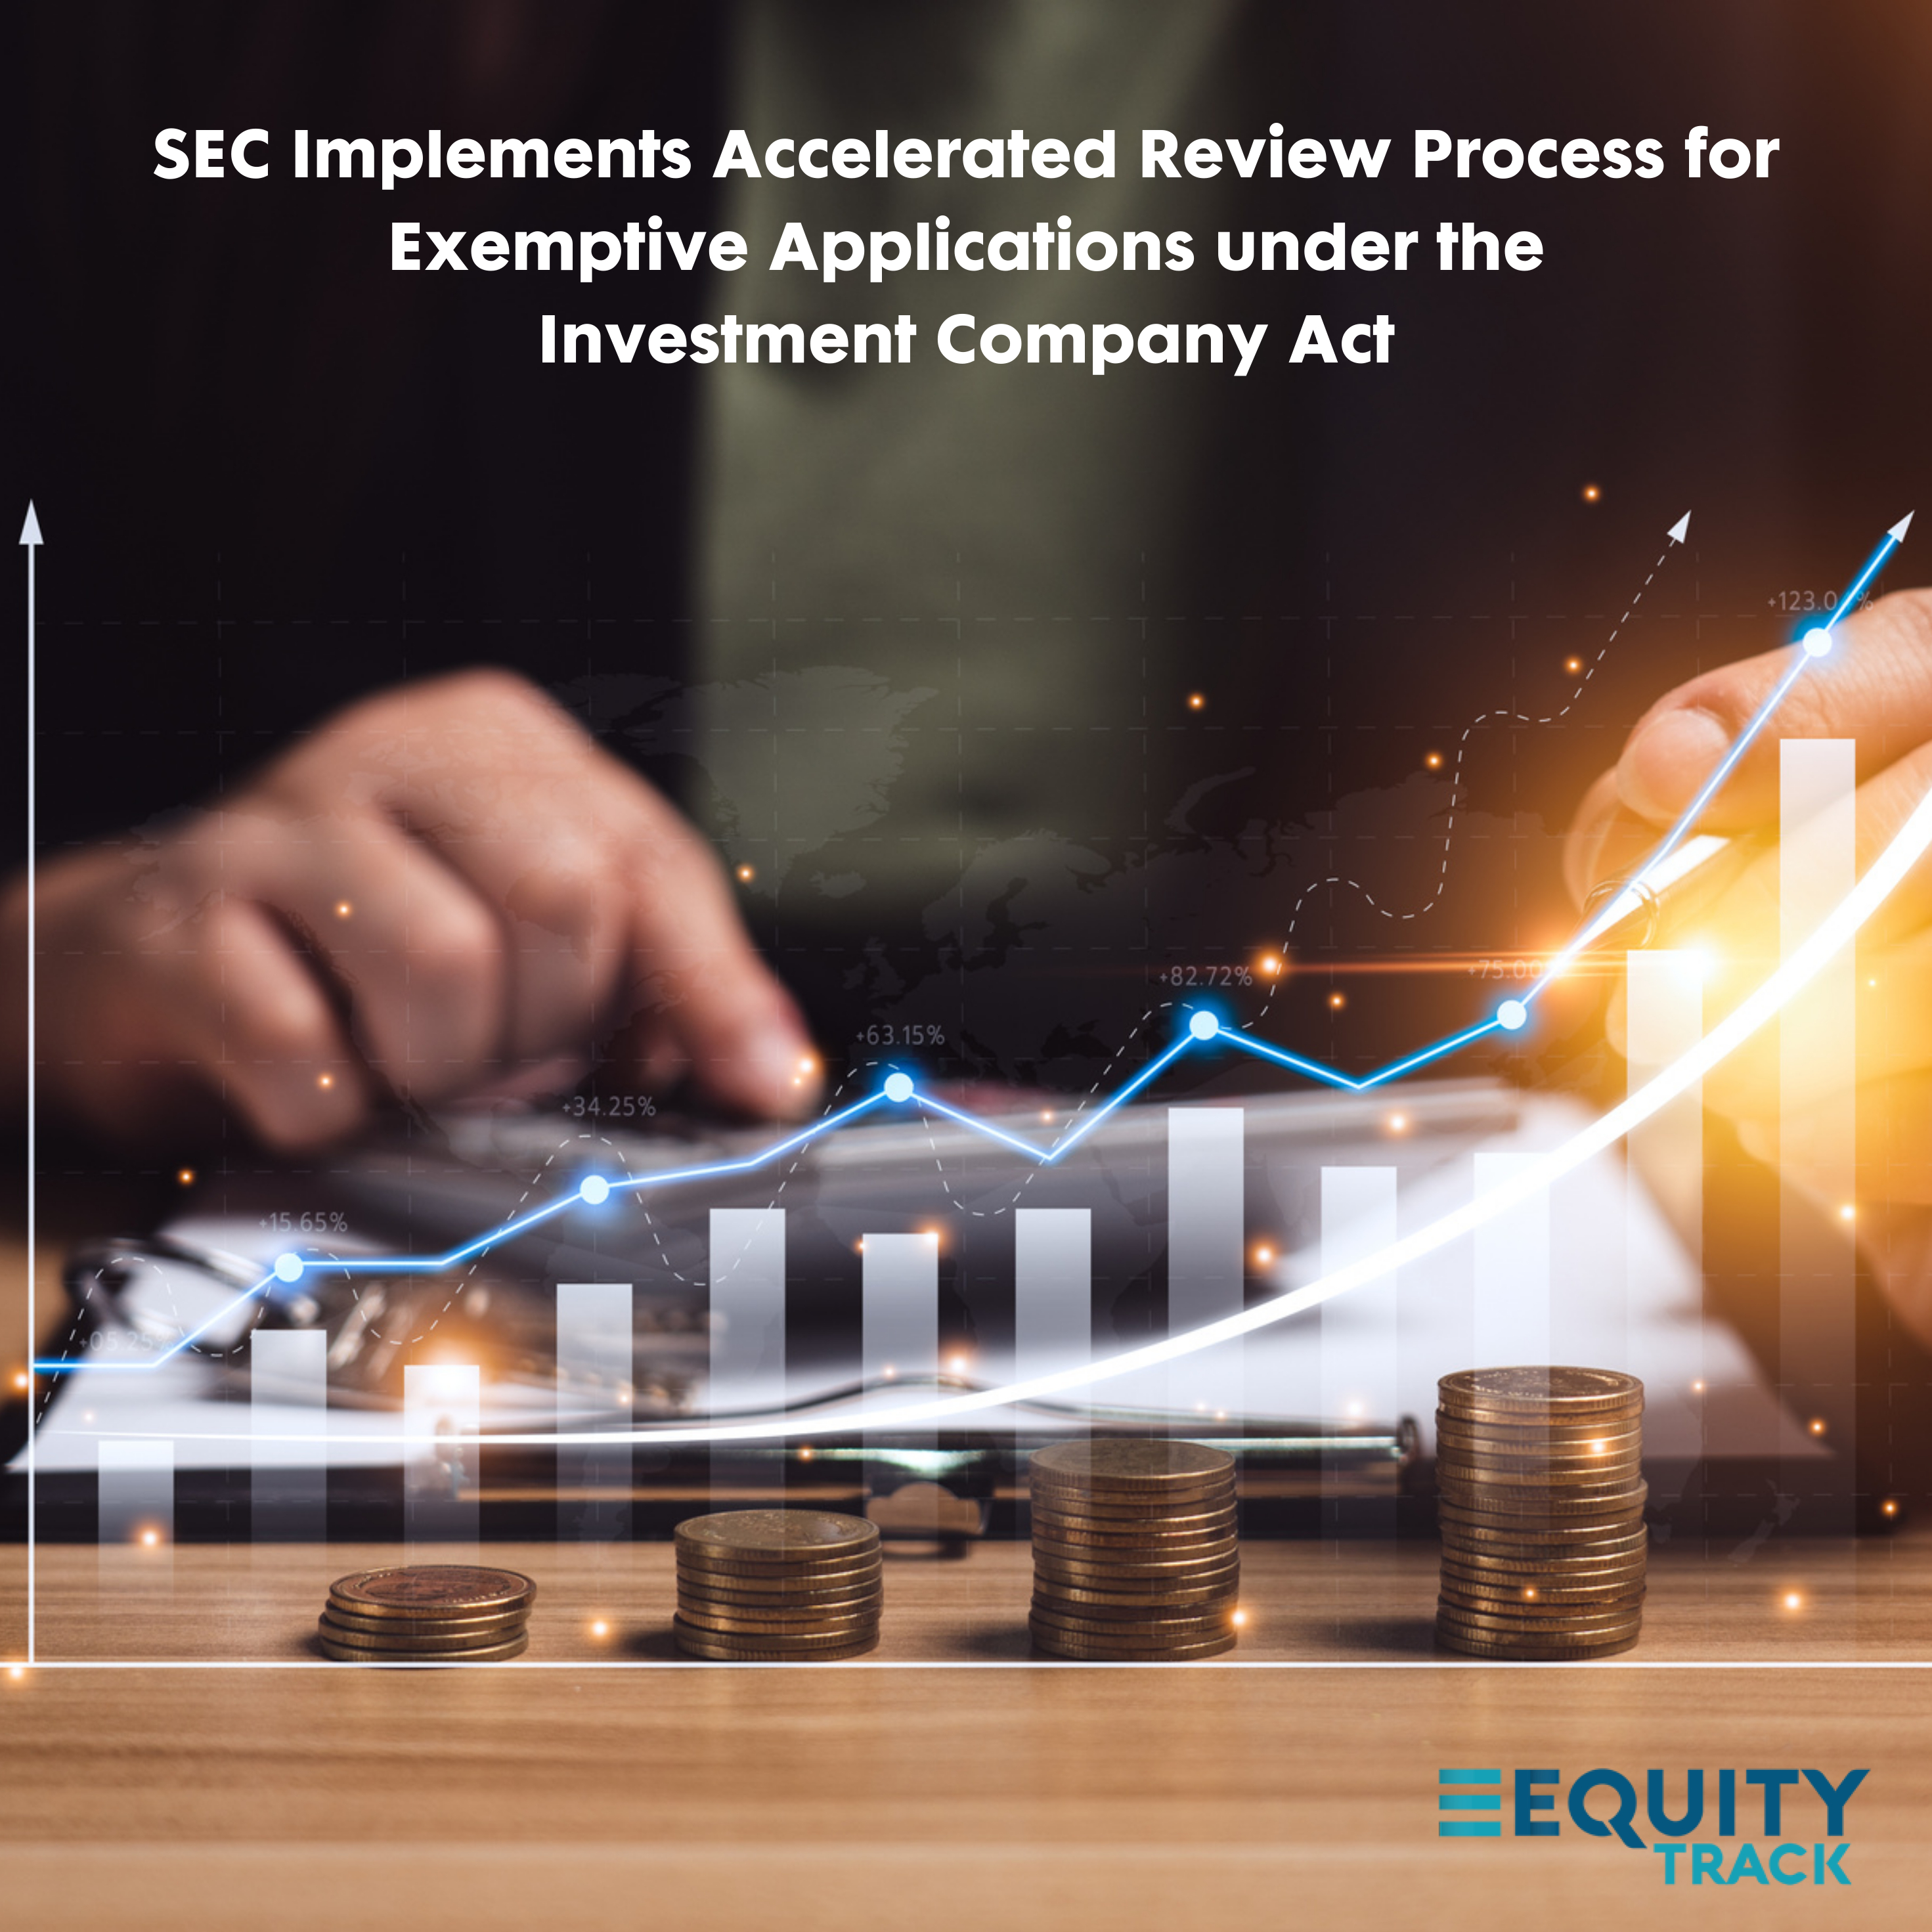 SEC Implements Accelerated Review Process for Exemptive Applications under the Investment Company Act